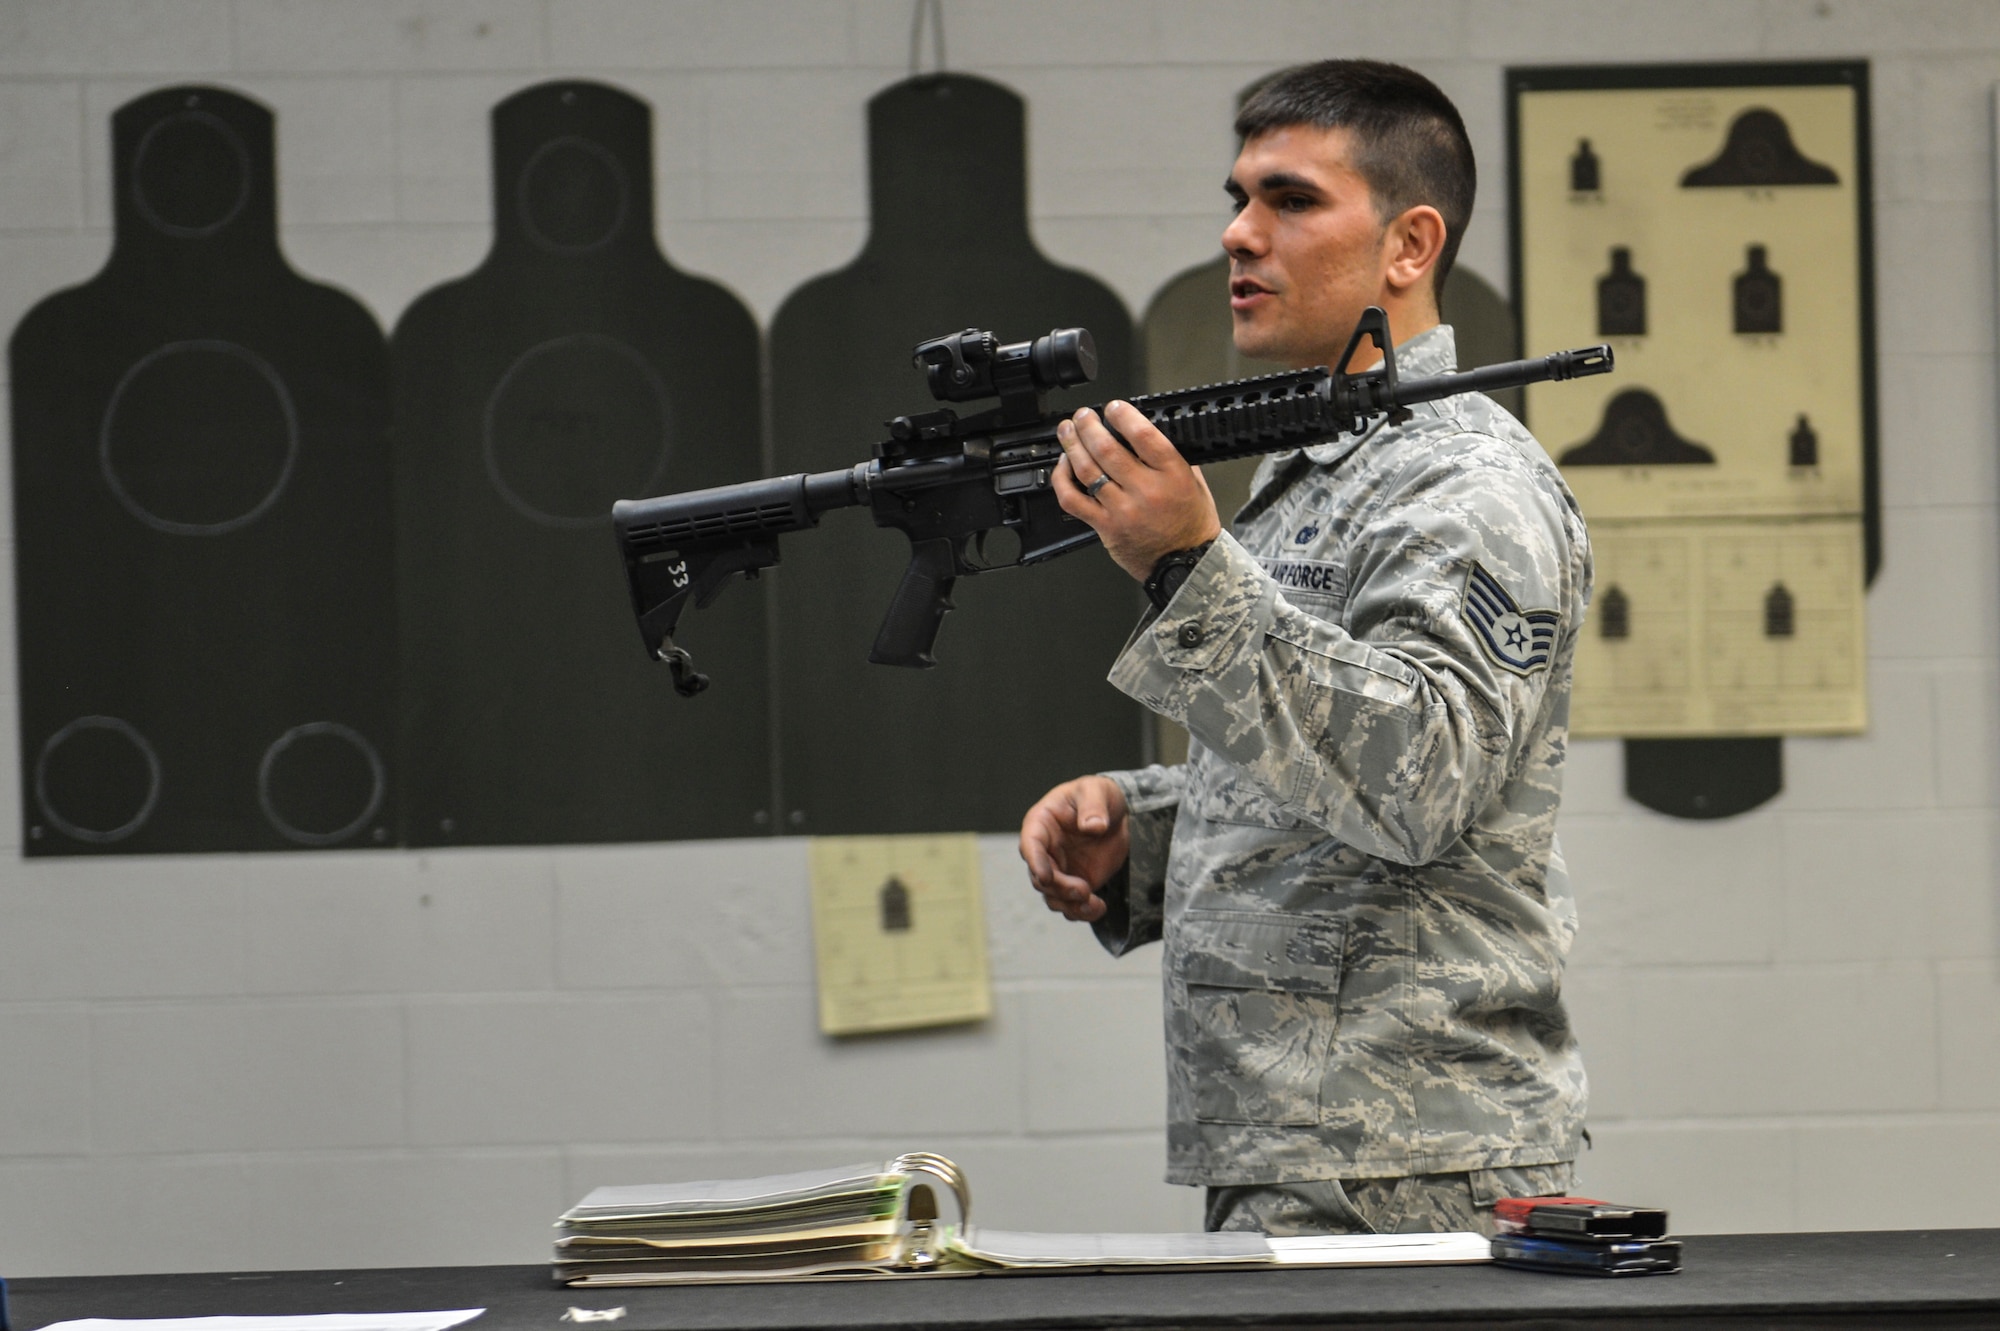 Staff Sgt. Christopher Hoffman, 627th Security Forces Squadron combat arms instructor, identifies each component of an M-4 carbine rifle to a class of McChord Airmen, April 9, 2014 at Joint Base Lewis-McChord, Wash. Enlisted combat arms instructors are certified security forces members who have completed the Combat Arms Apprentice Course at Joint Base San Antonio, Texas and serve as the professionals of small arms training within the Air Force. (U.S. Air Force photo/Staff Sgt. Russ Jackson)